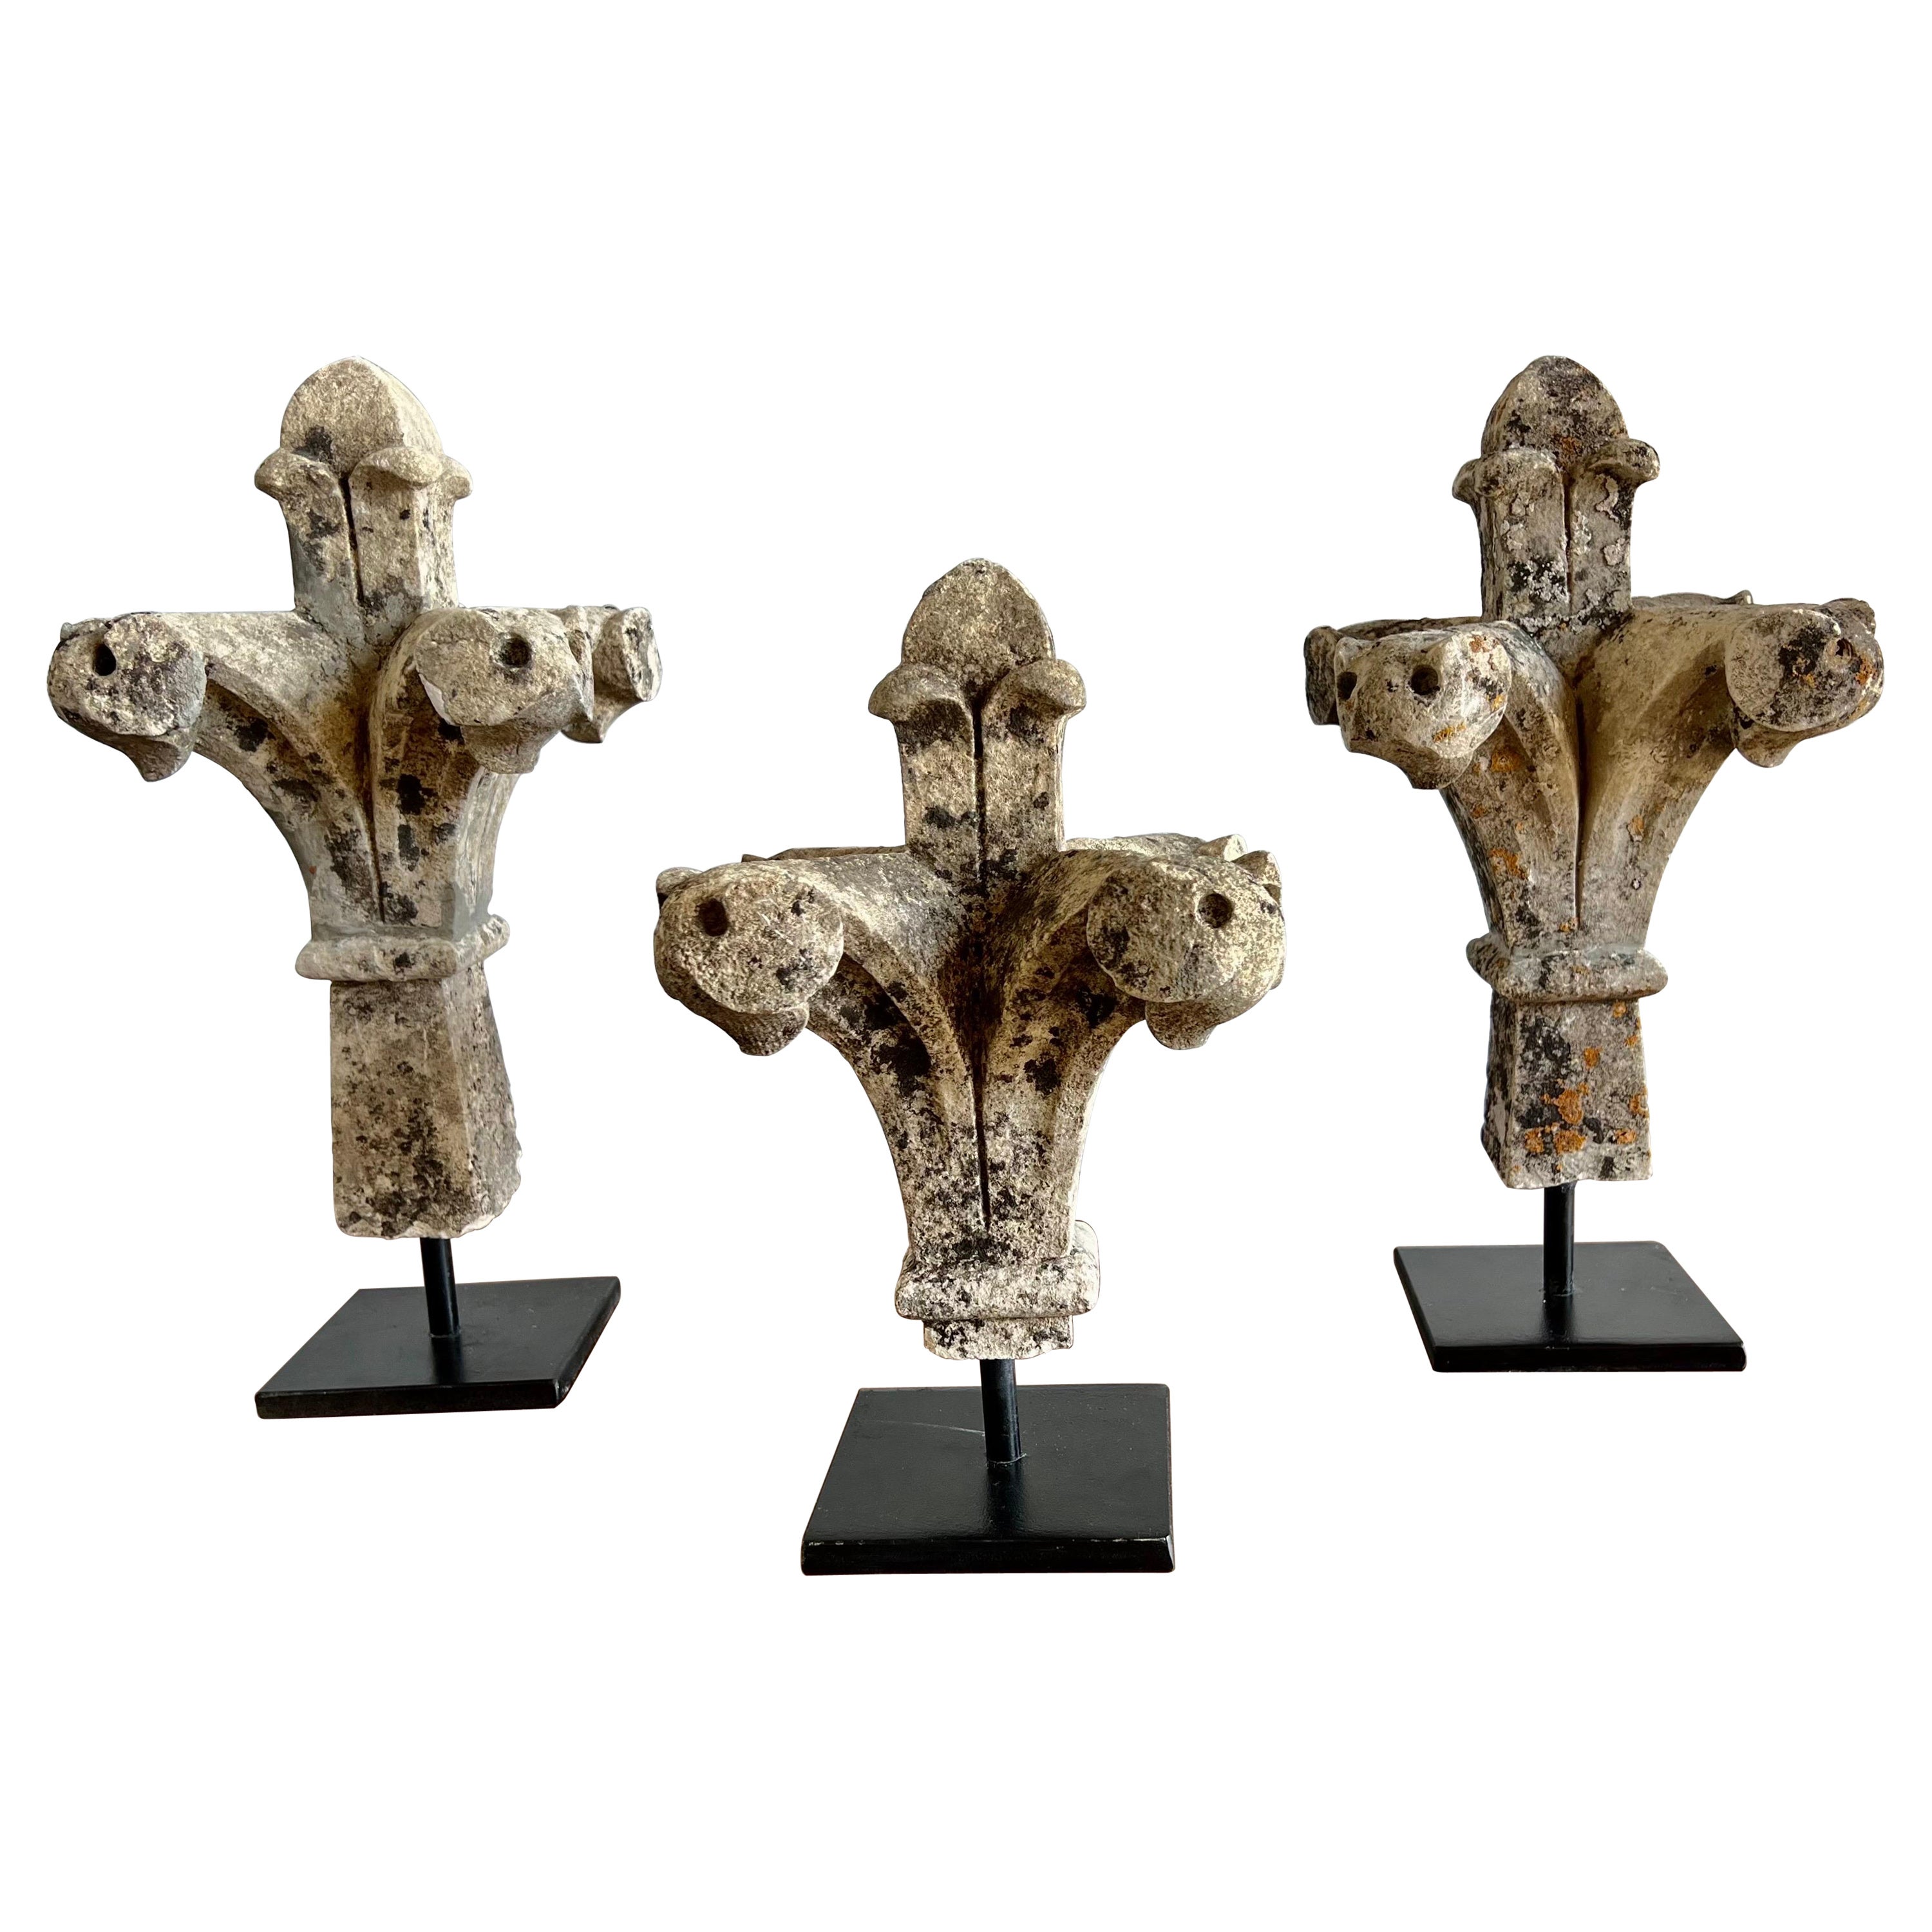 Set of 19th C. French Stone Finials on Iron Bases